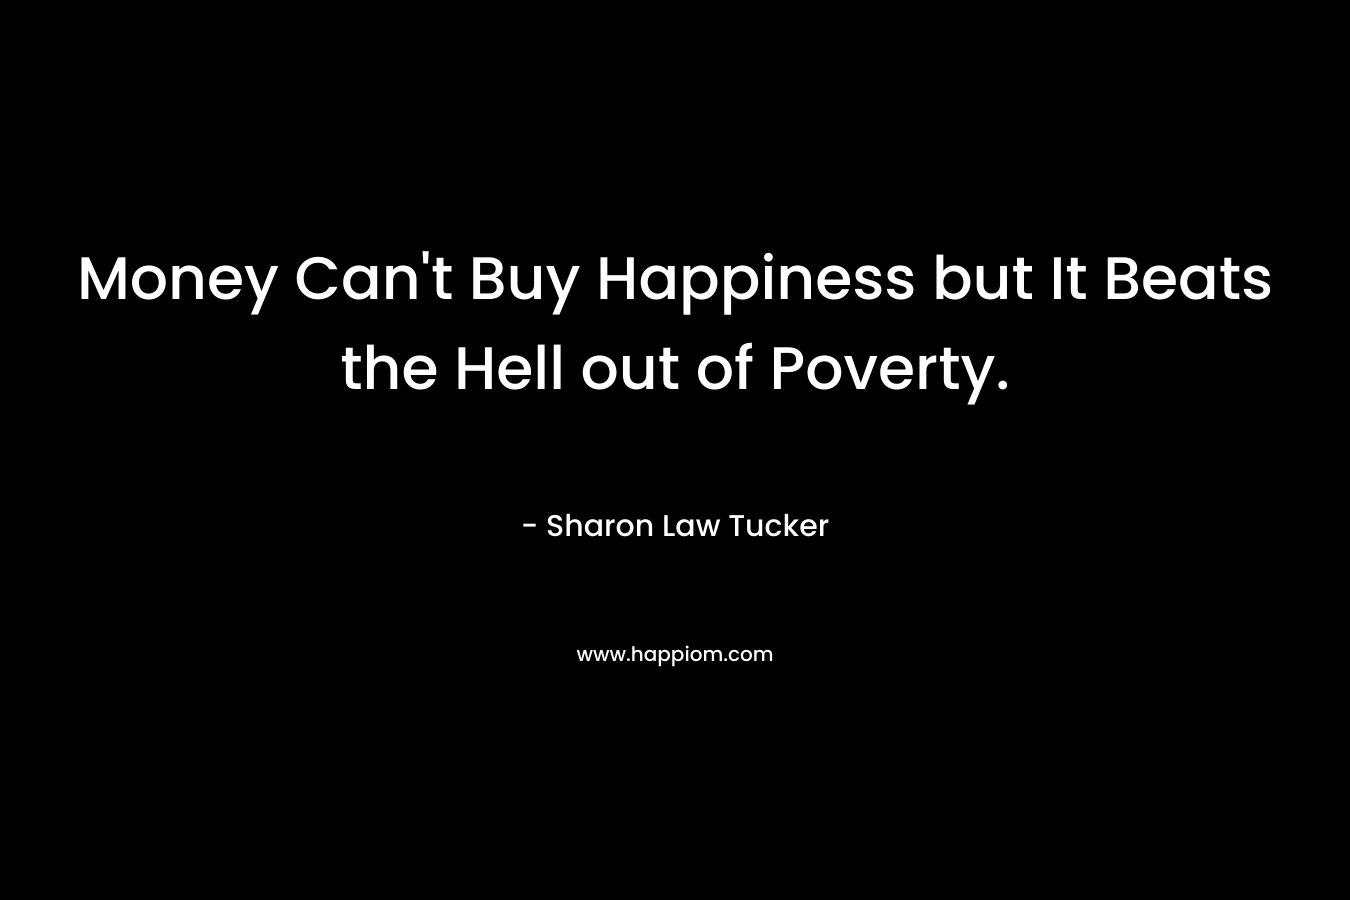 Money Can't Buy Happiness but It Beats the Hell out of Poverty.